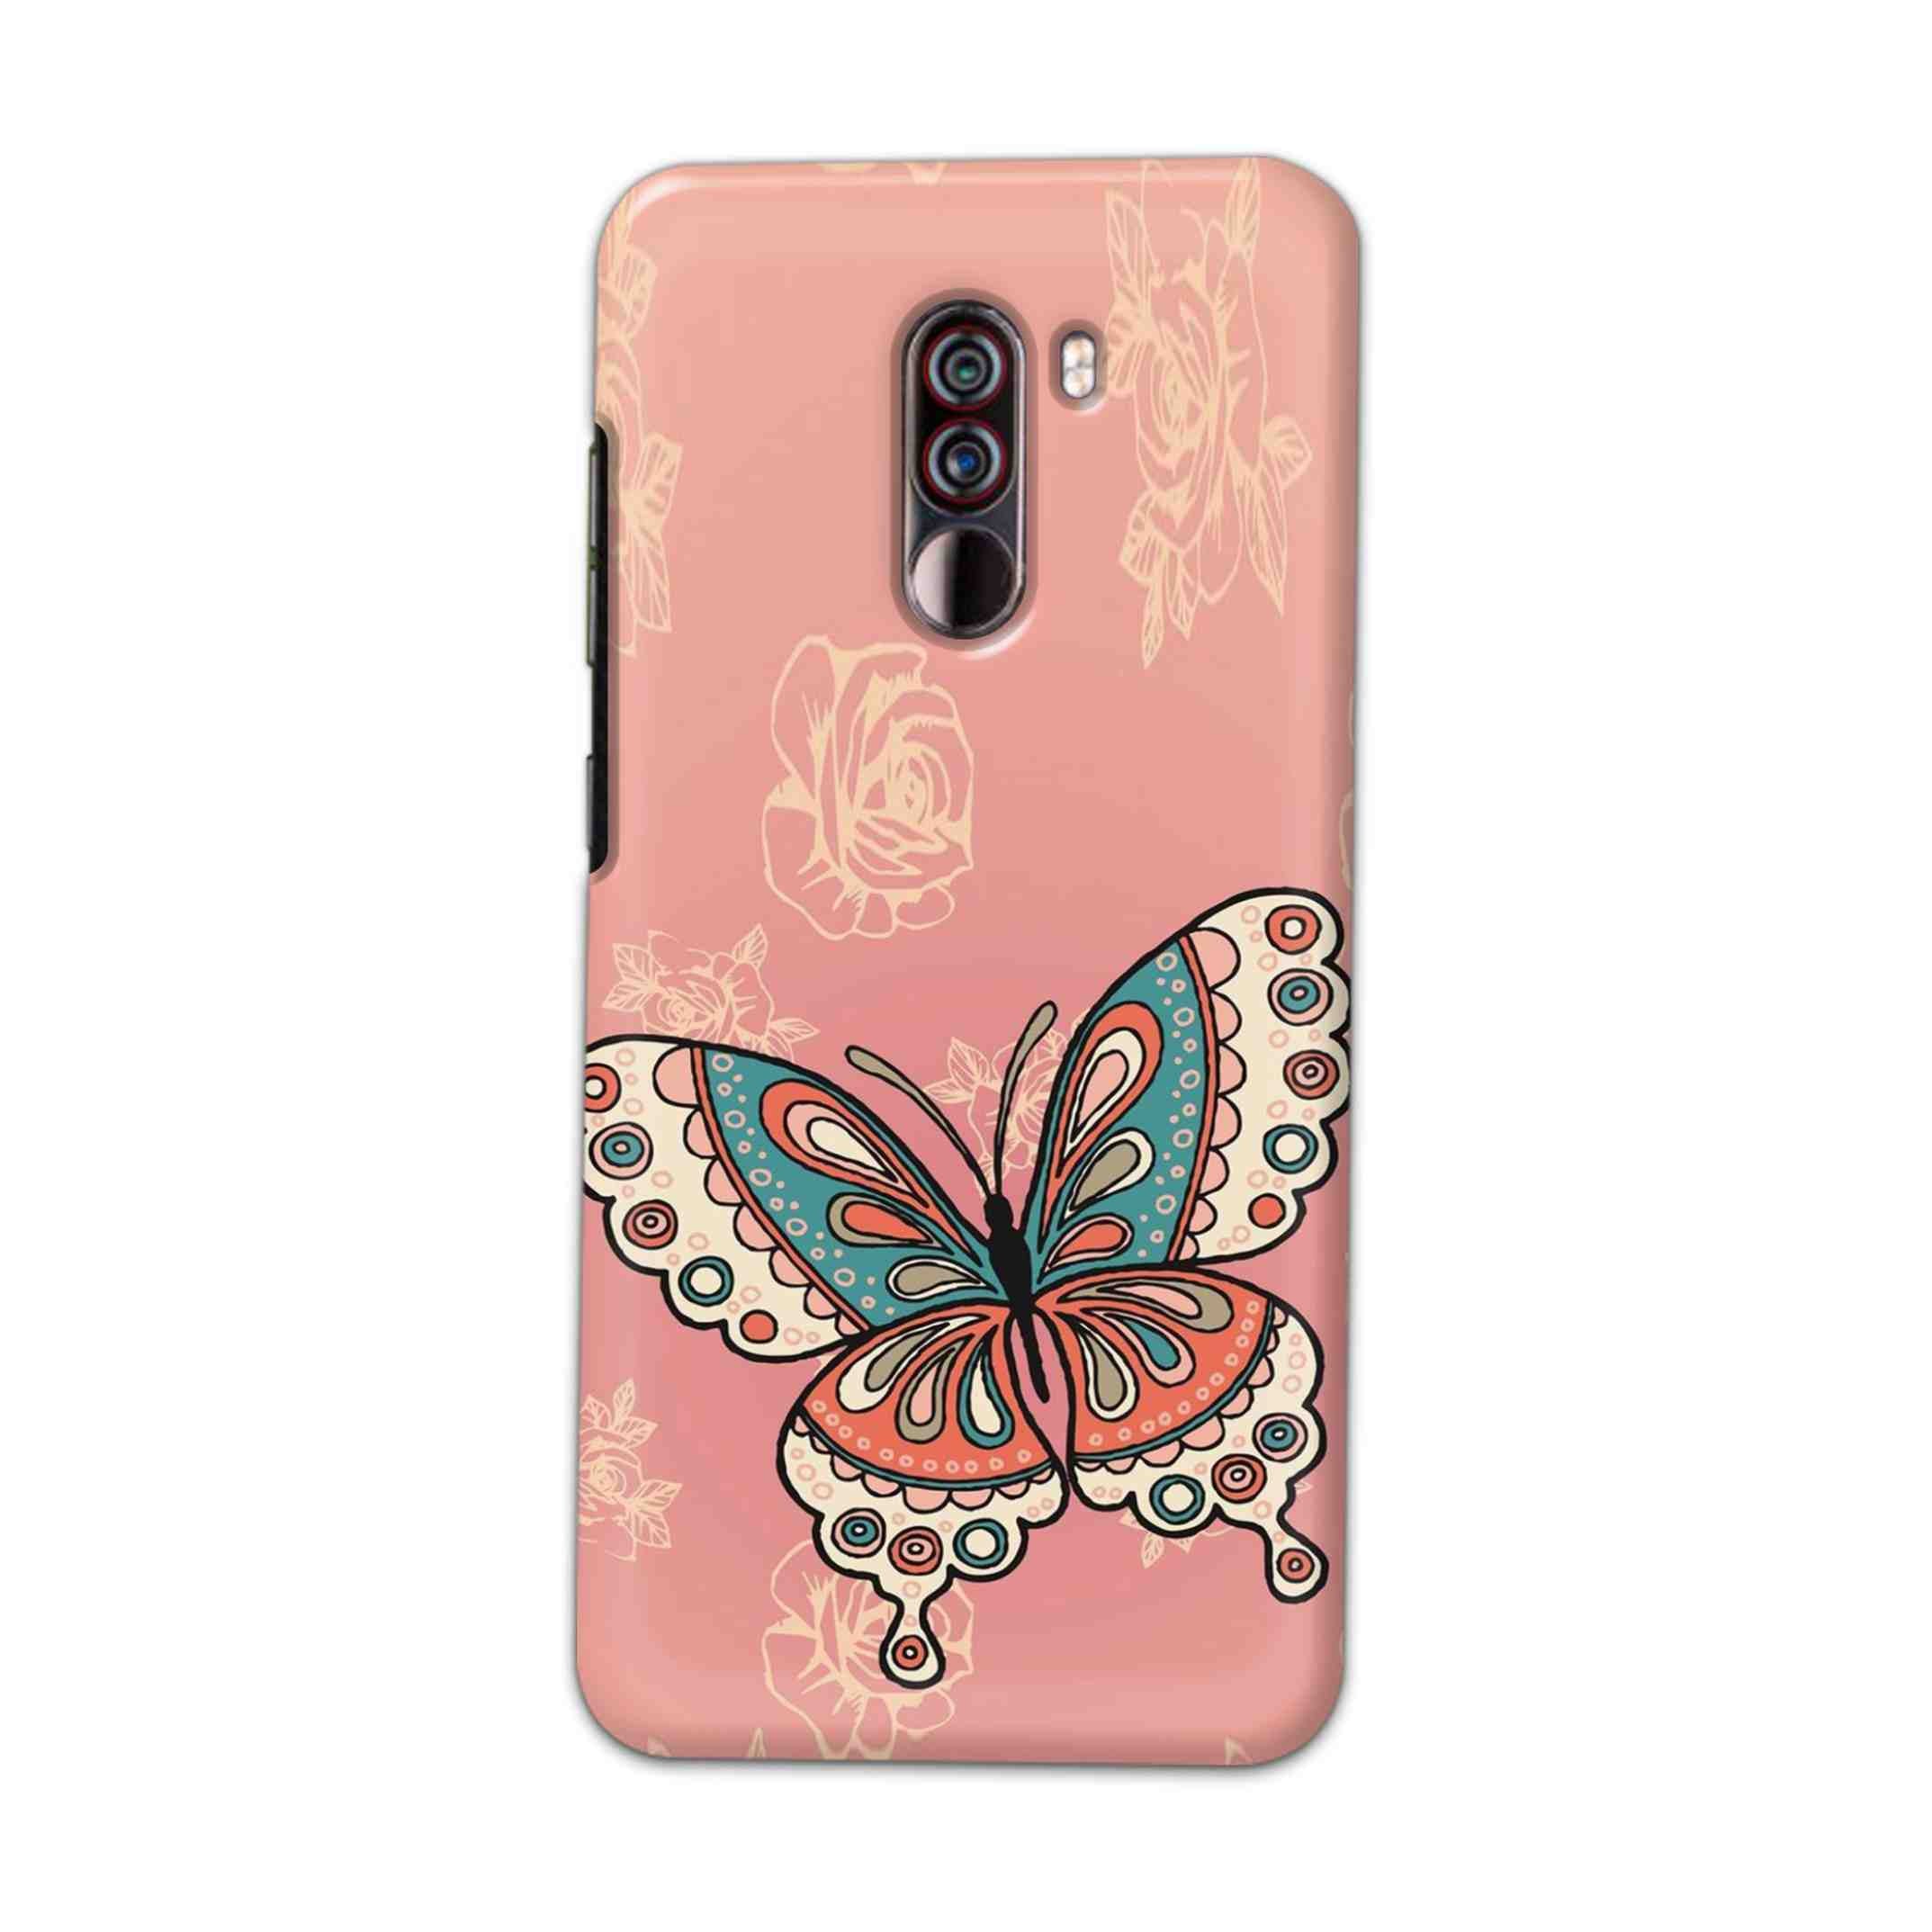 Buy Butterfly Hard Back Mobile Phone Case Cover For Xiaomi Pocophone F1 Online